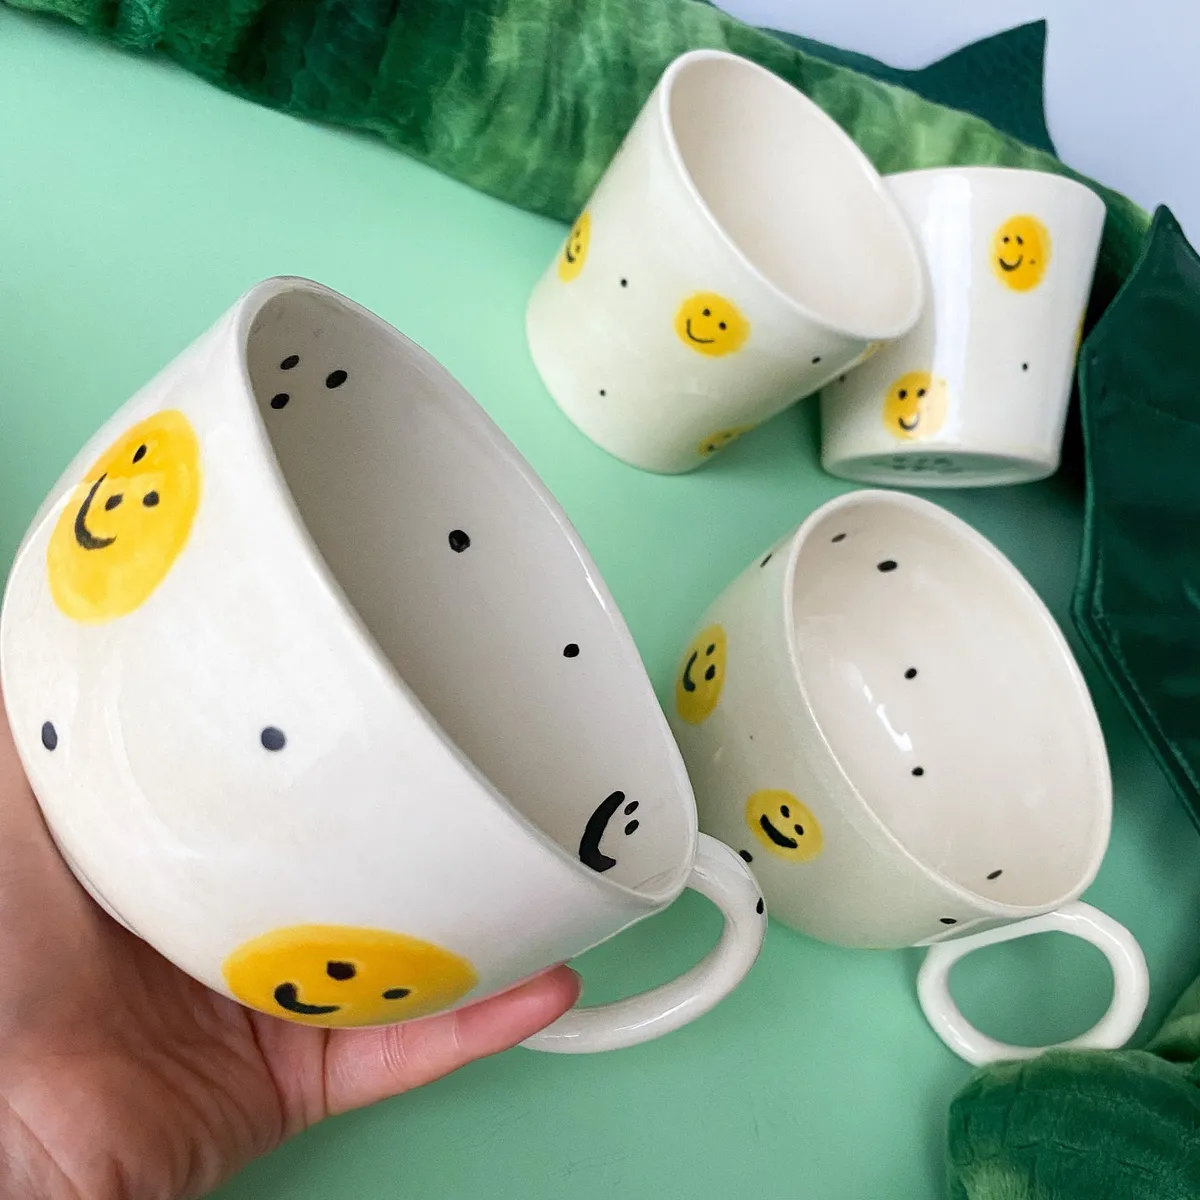 Smiley face pottery painting ideas